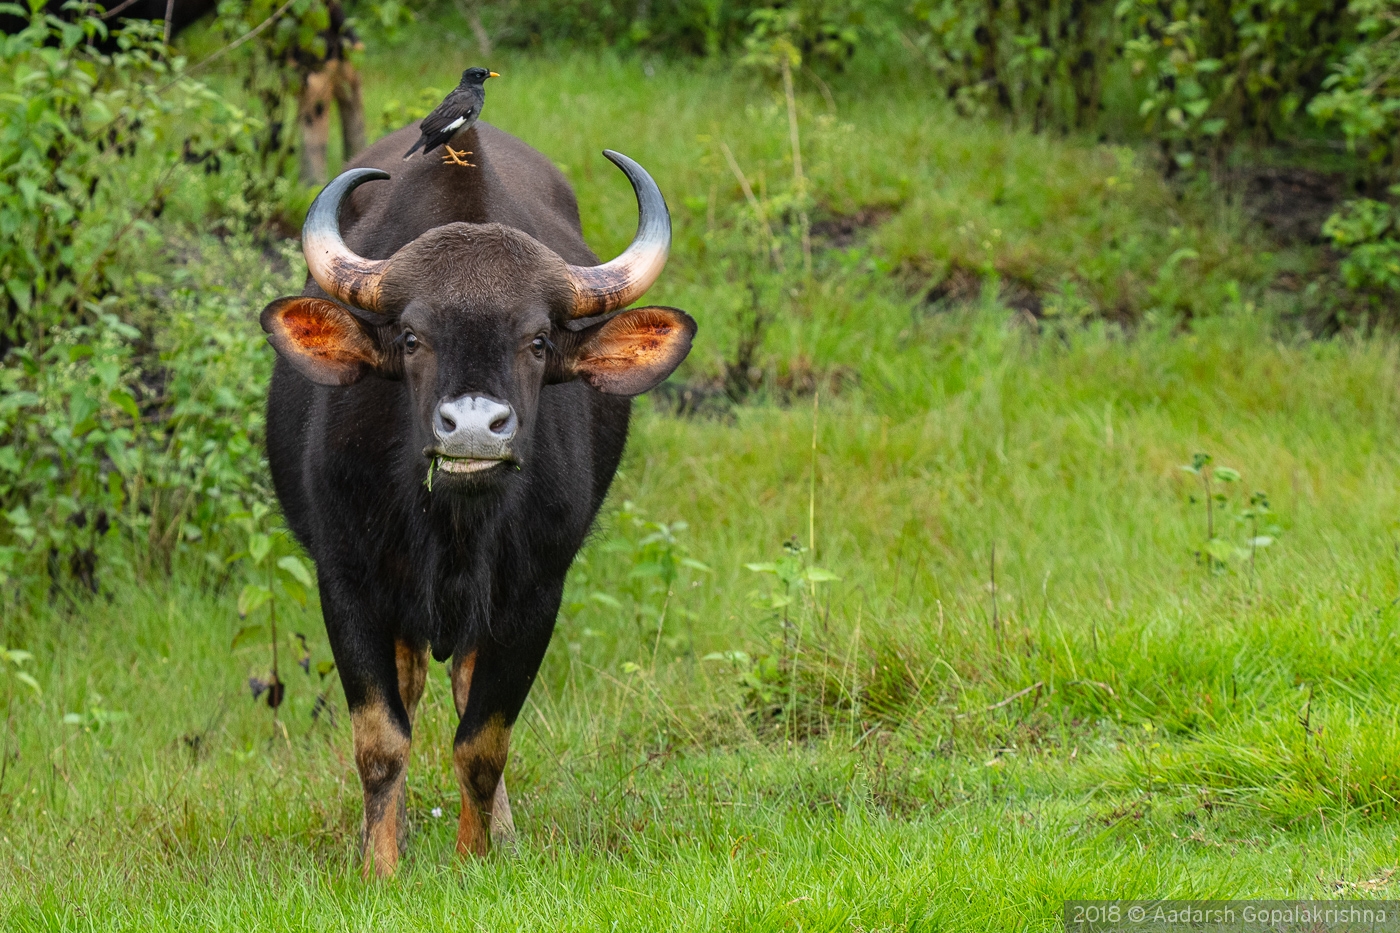 Gaur (Indian Bison) with Indian Myna, Kabini forest, India by Aadarsh Gopalakrishna